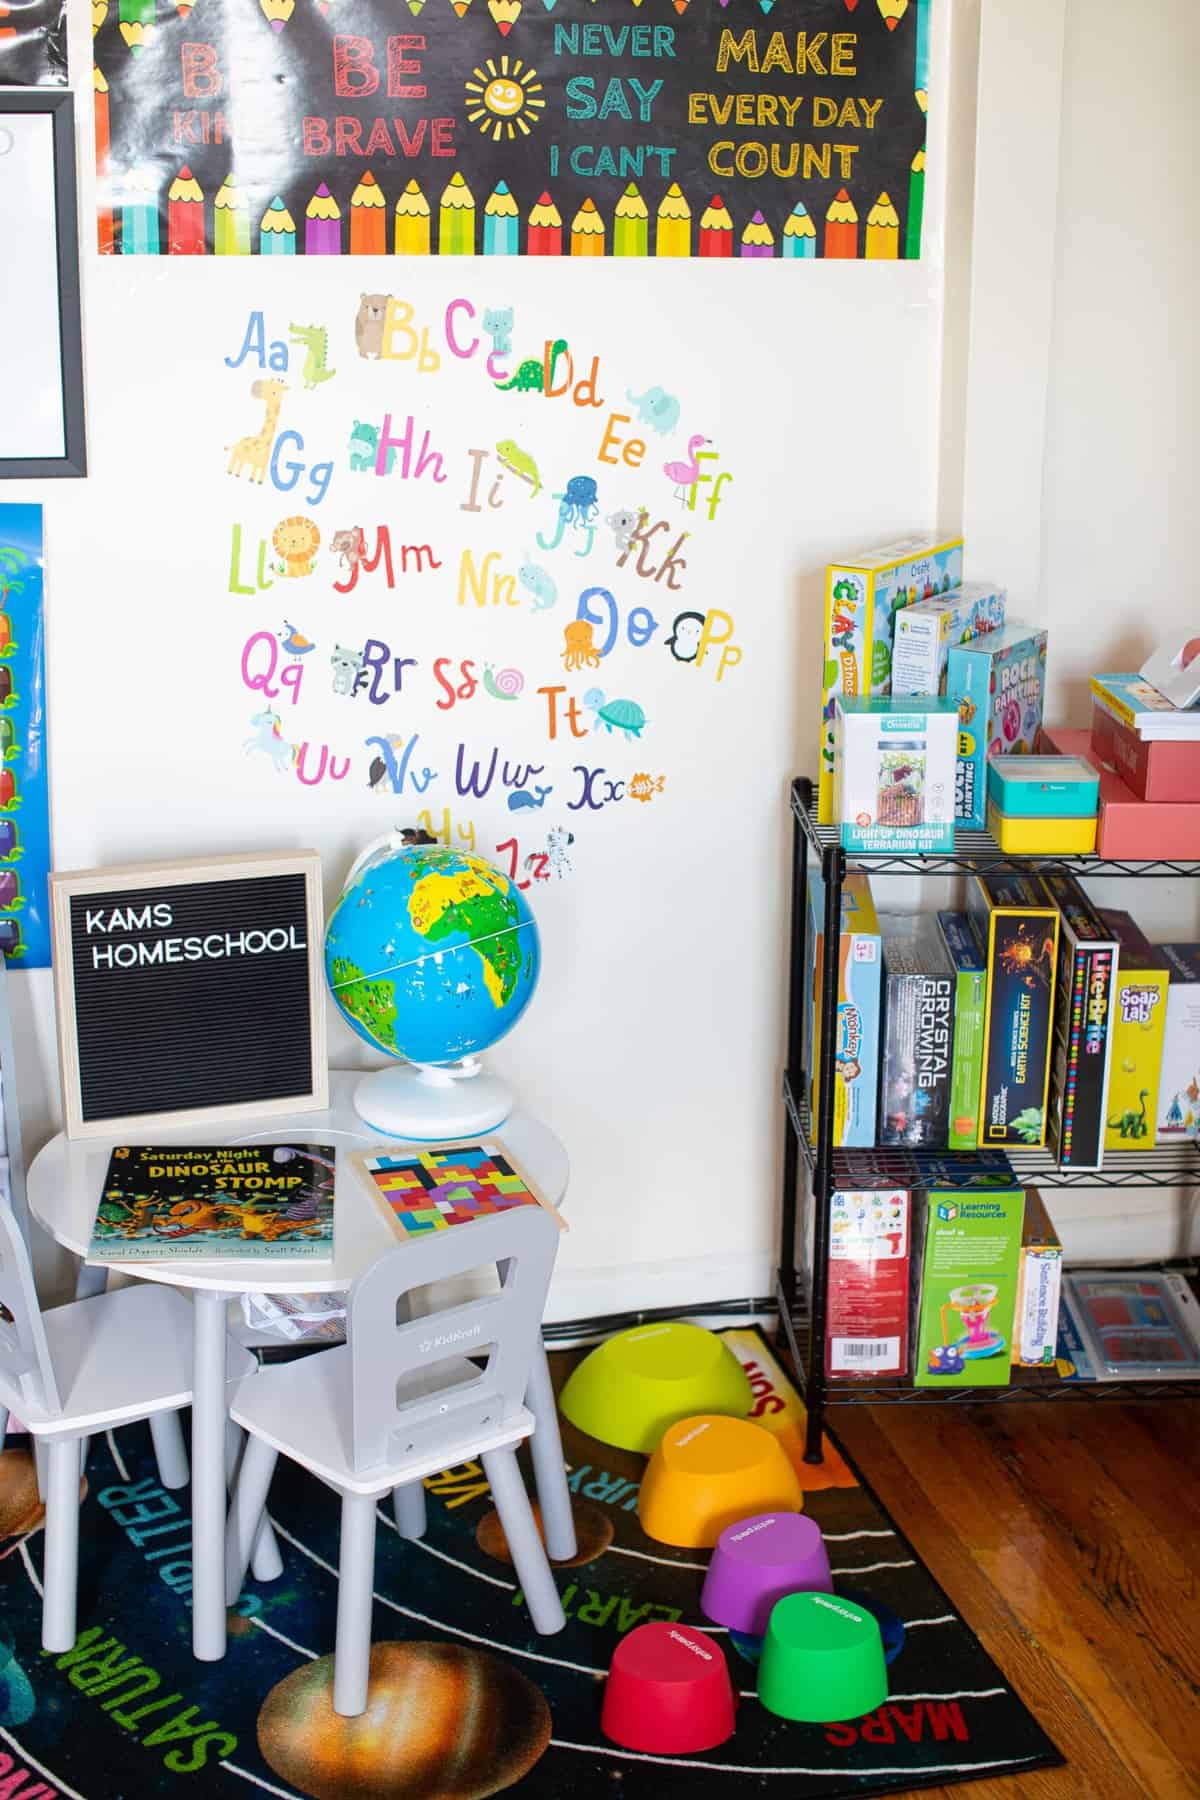 DIY Homeschool Room Ideas For a Small Space